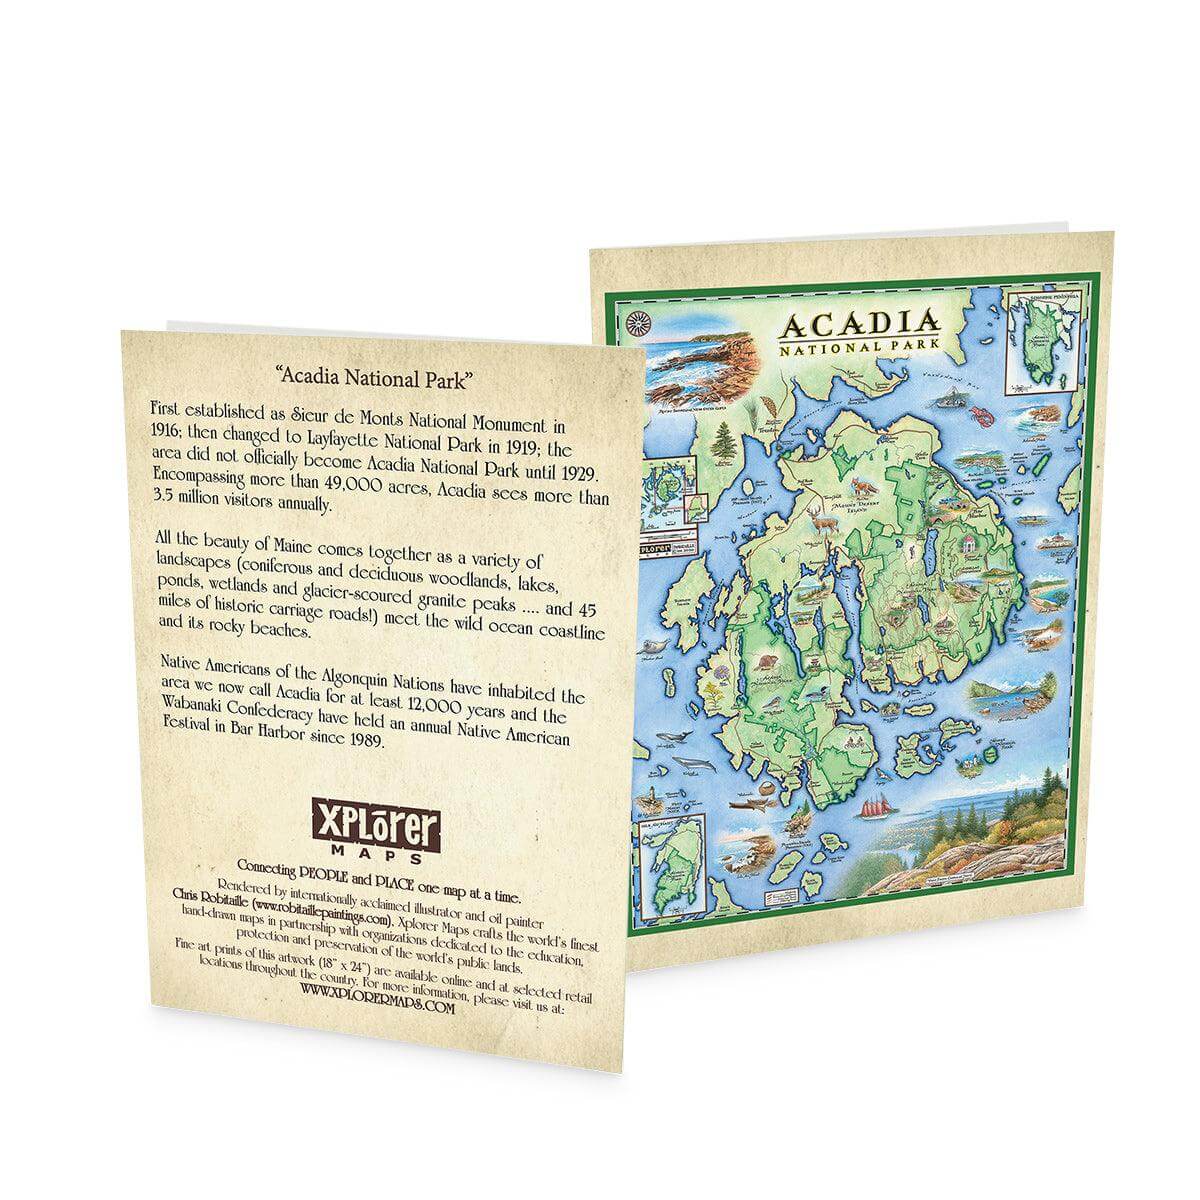 Acadia National Park Map Notecard pack of 12. Featuring Cadillac Mountains, Lobster, fishing boats, and Otter Cliffs.  